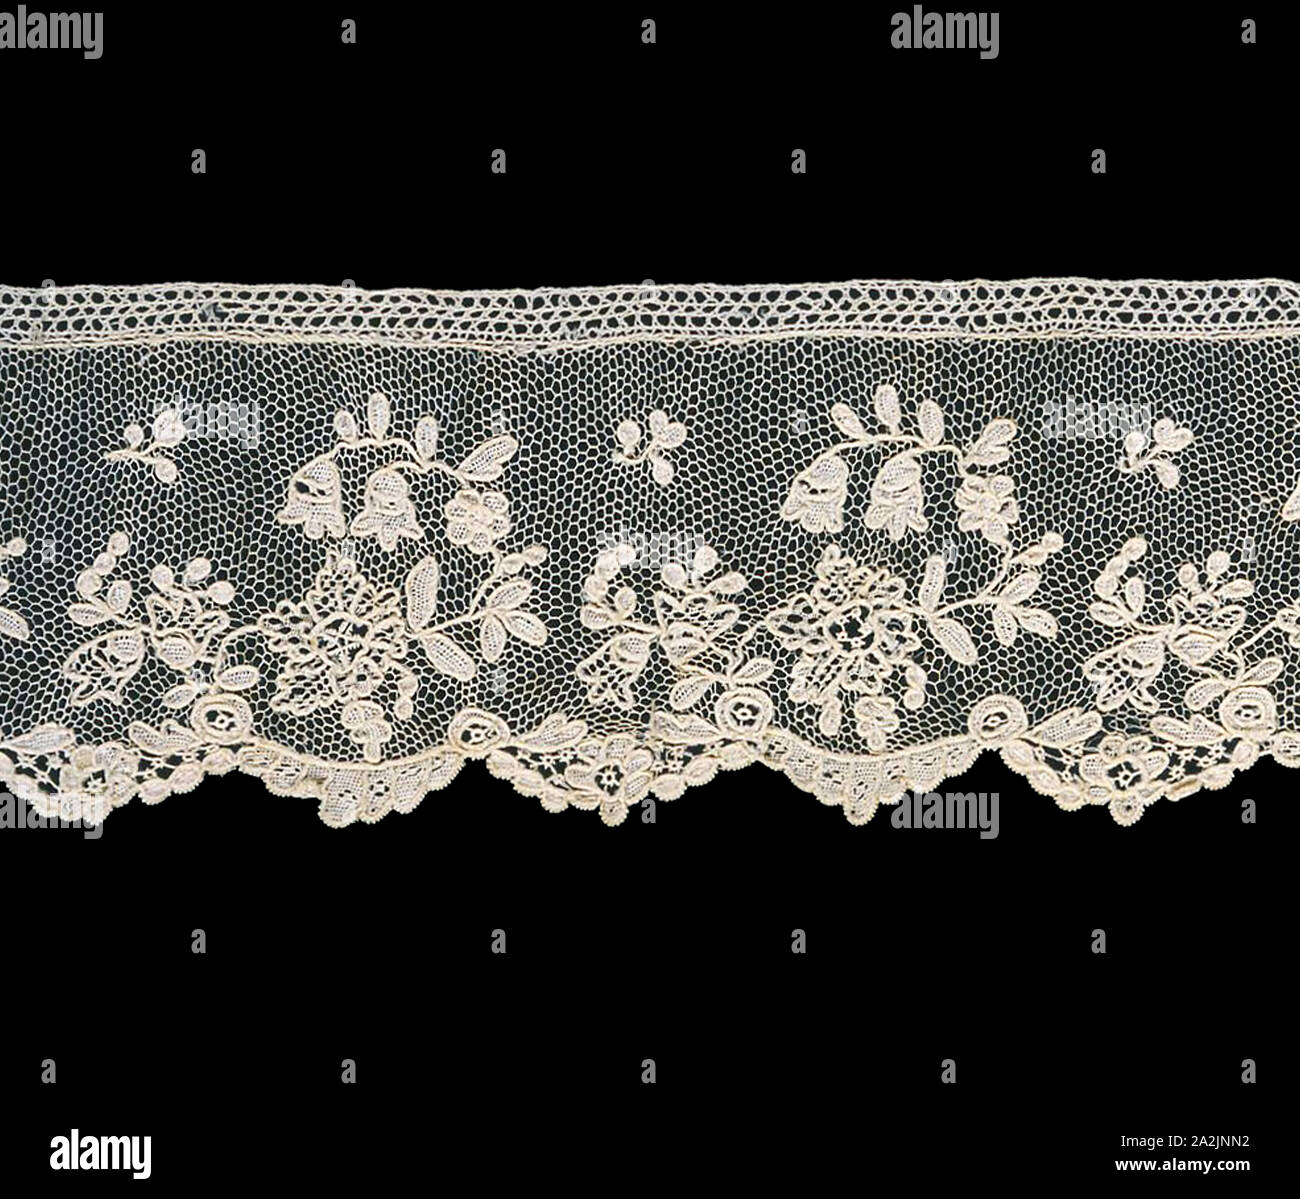 Borders, 1820s/30s, France, Linen and horsehair, needle lace of a type known as "Point D'Aleçon Stock Photo